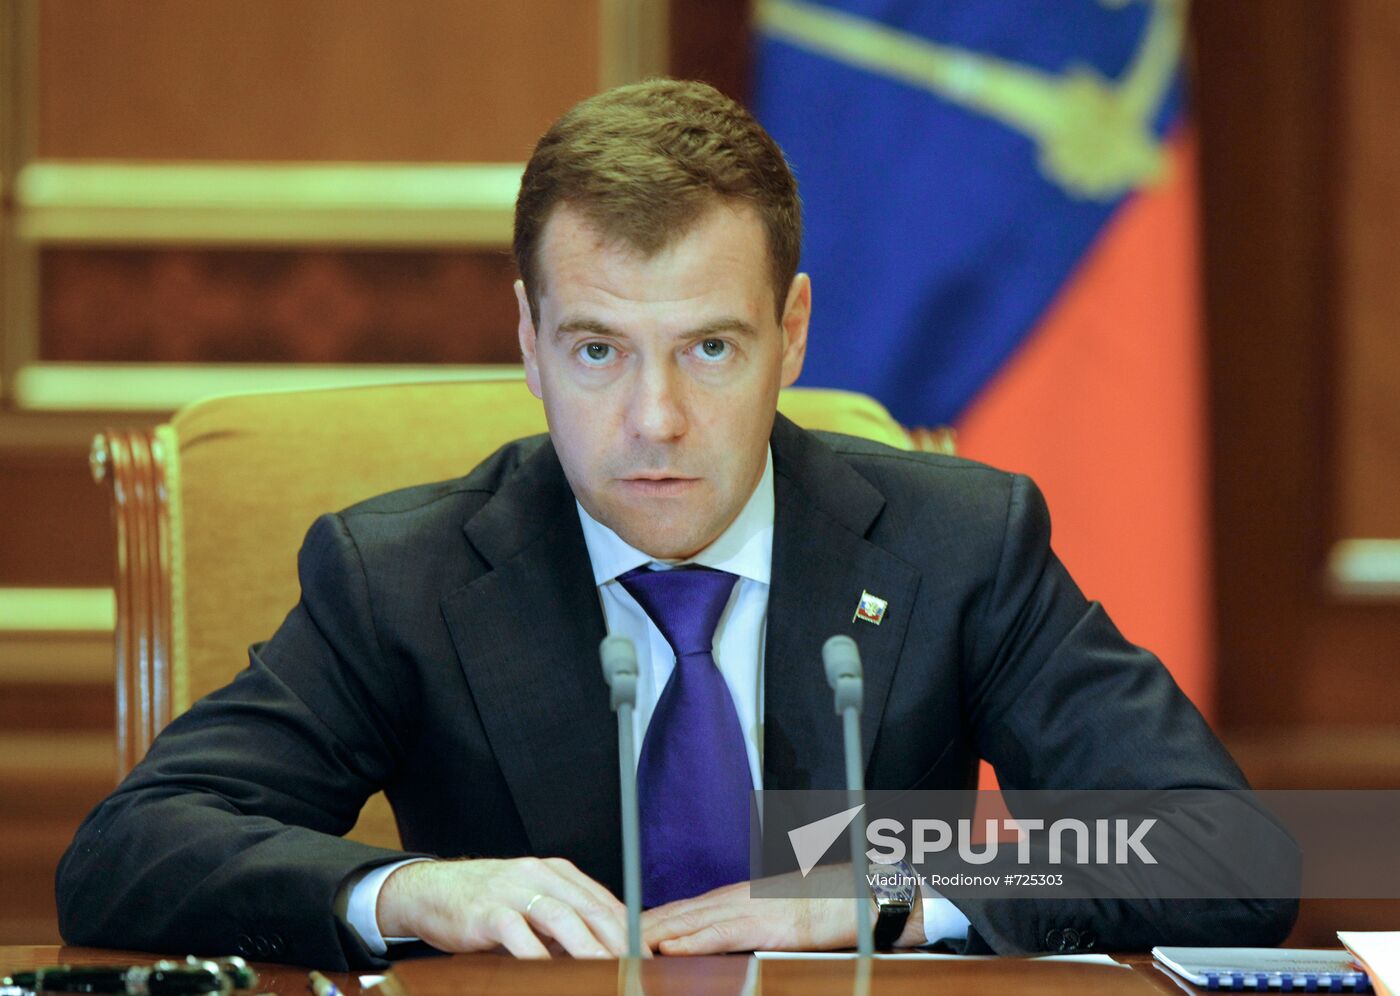 Dmitry Medvedev conducts certain events, July 22, 2010